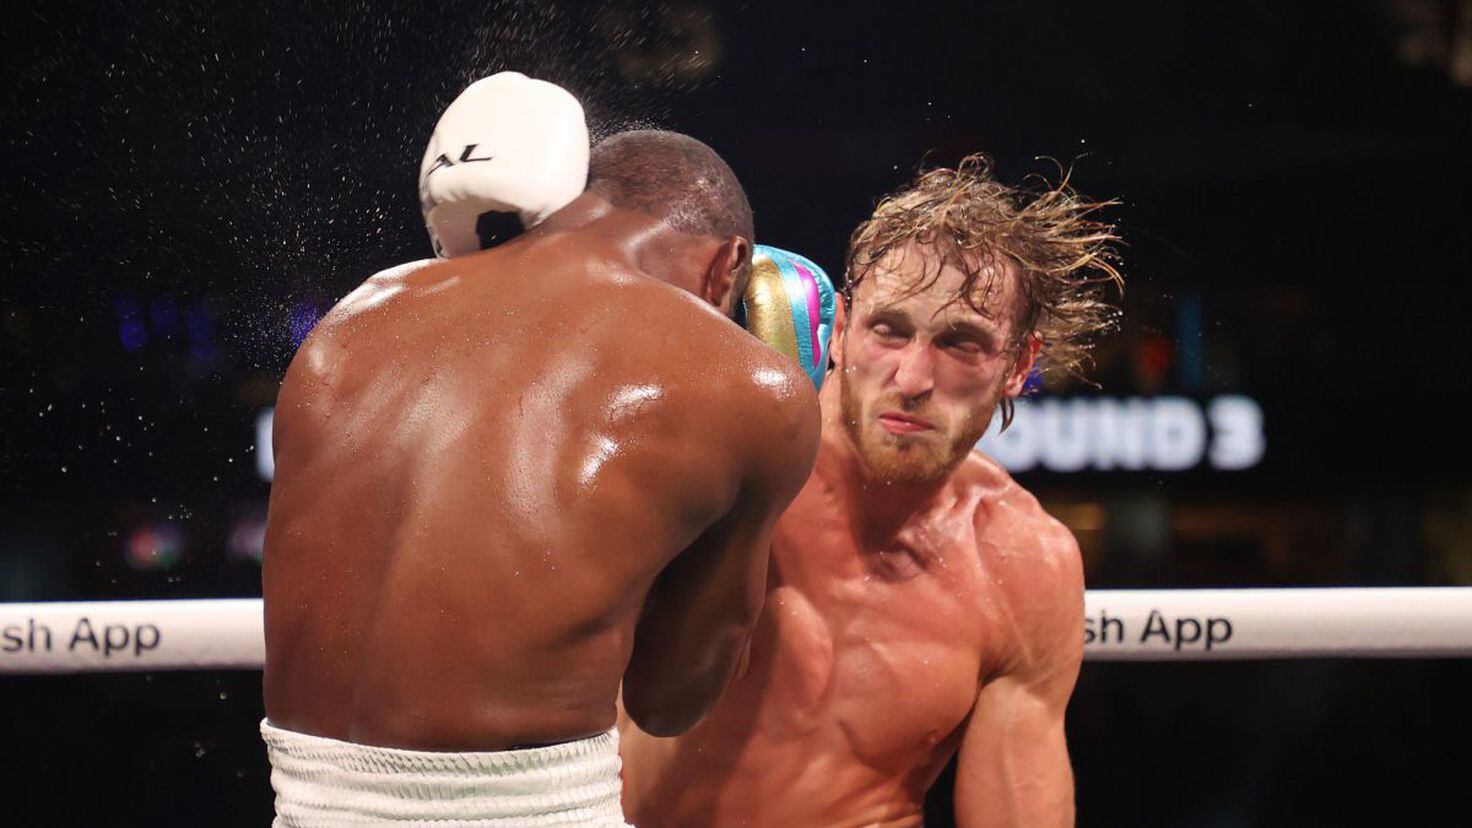 Inspired by Logan Paul vs Floyd Mayweather? 7 benefits of taking up boxing